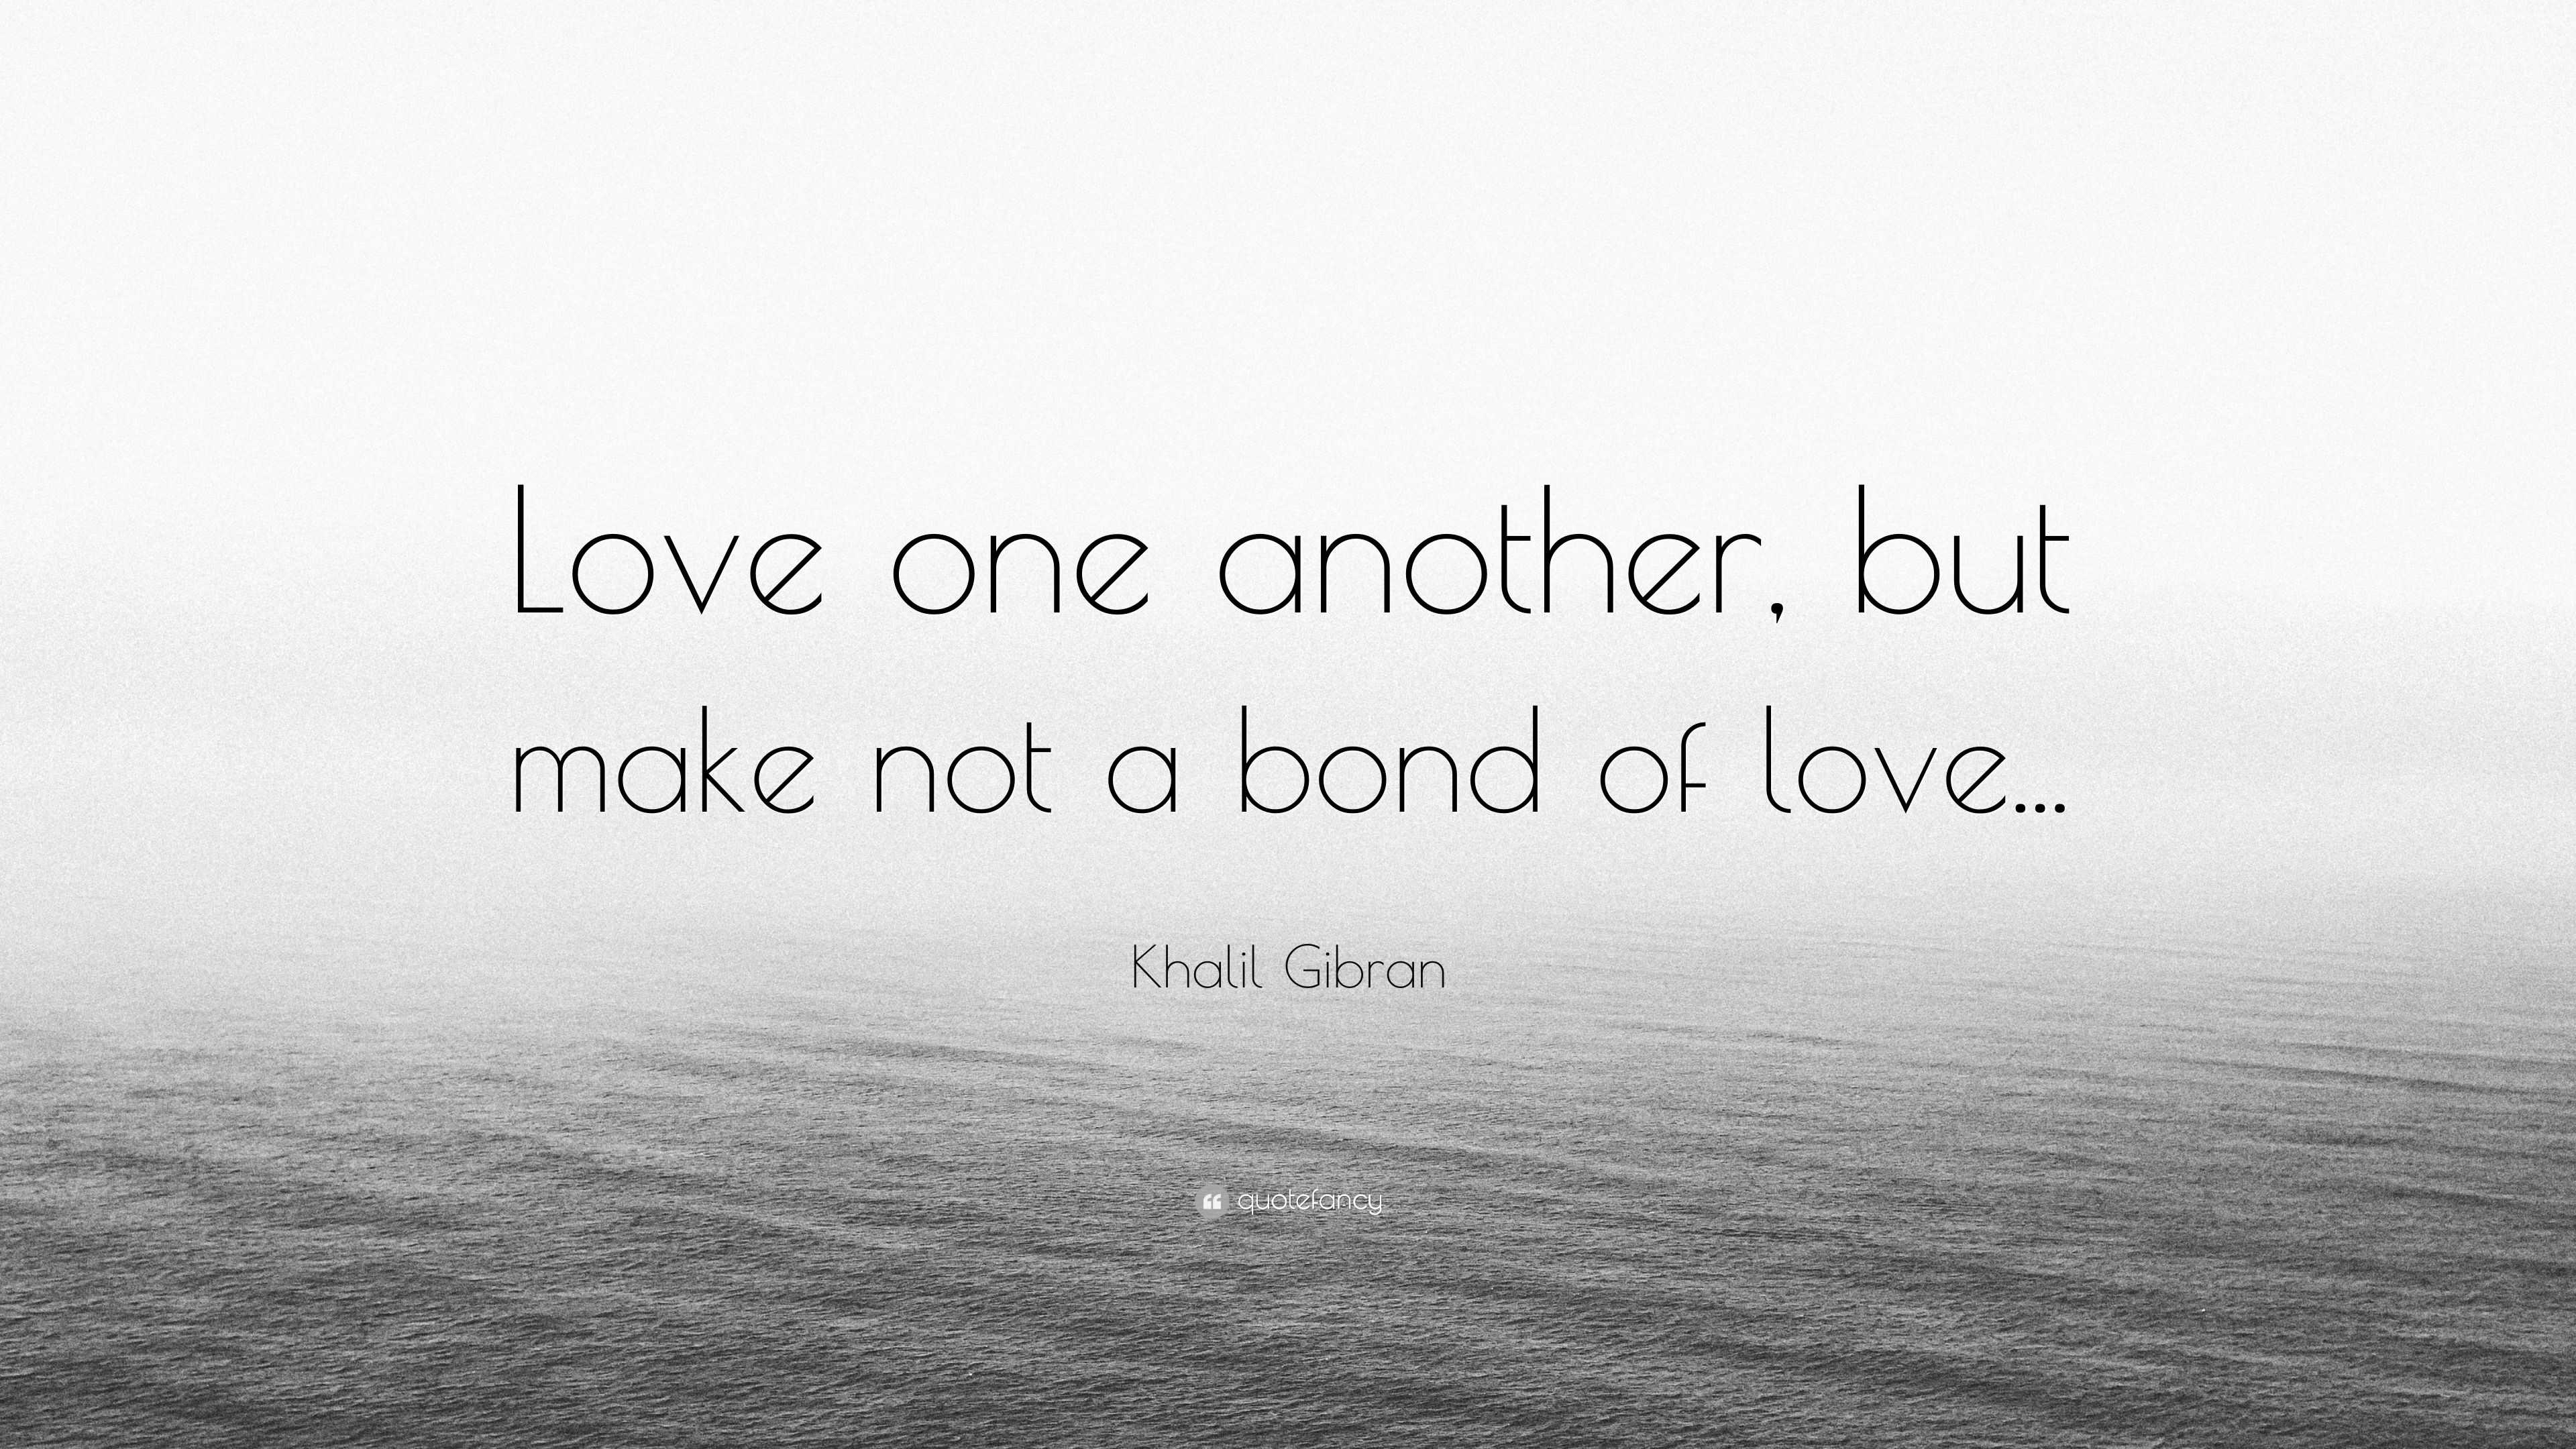 Khalil Gibran Quote “Love one another but make not a bond of love